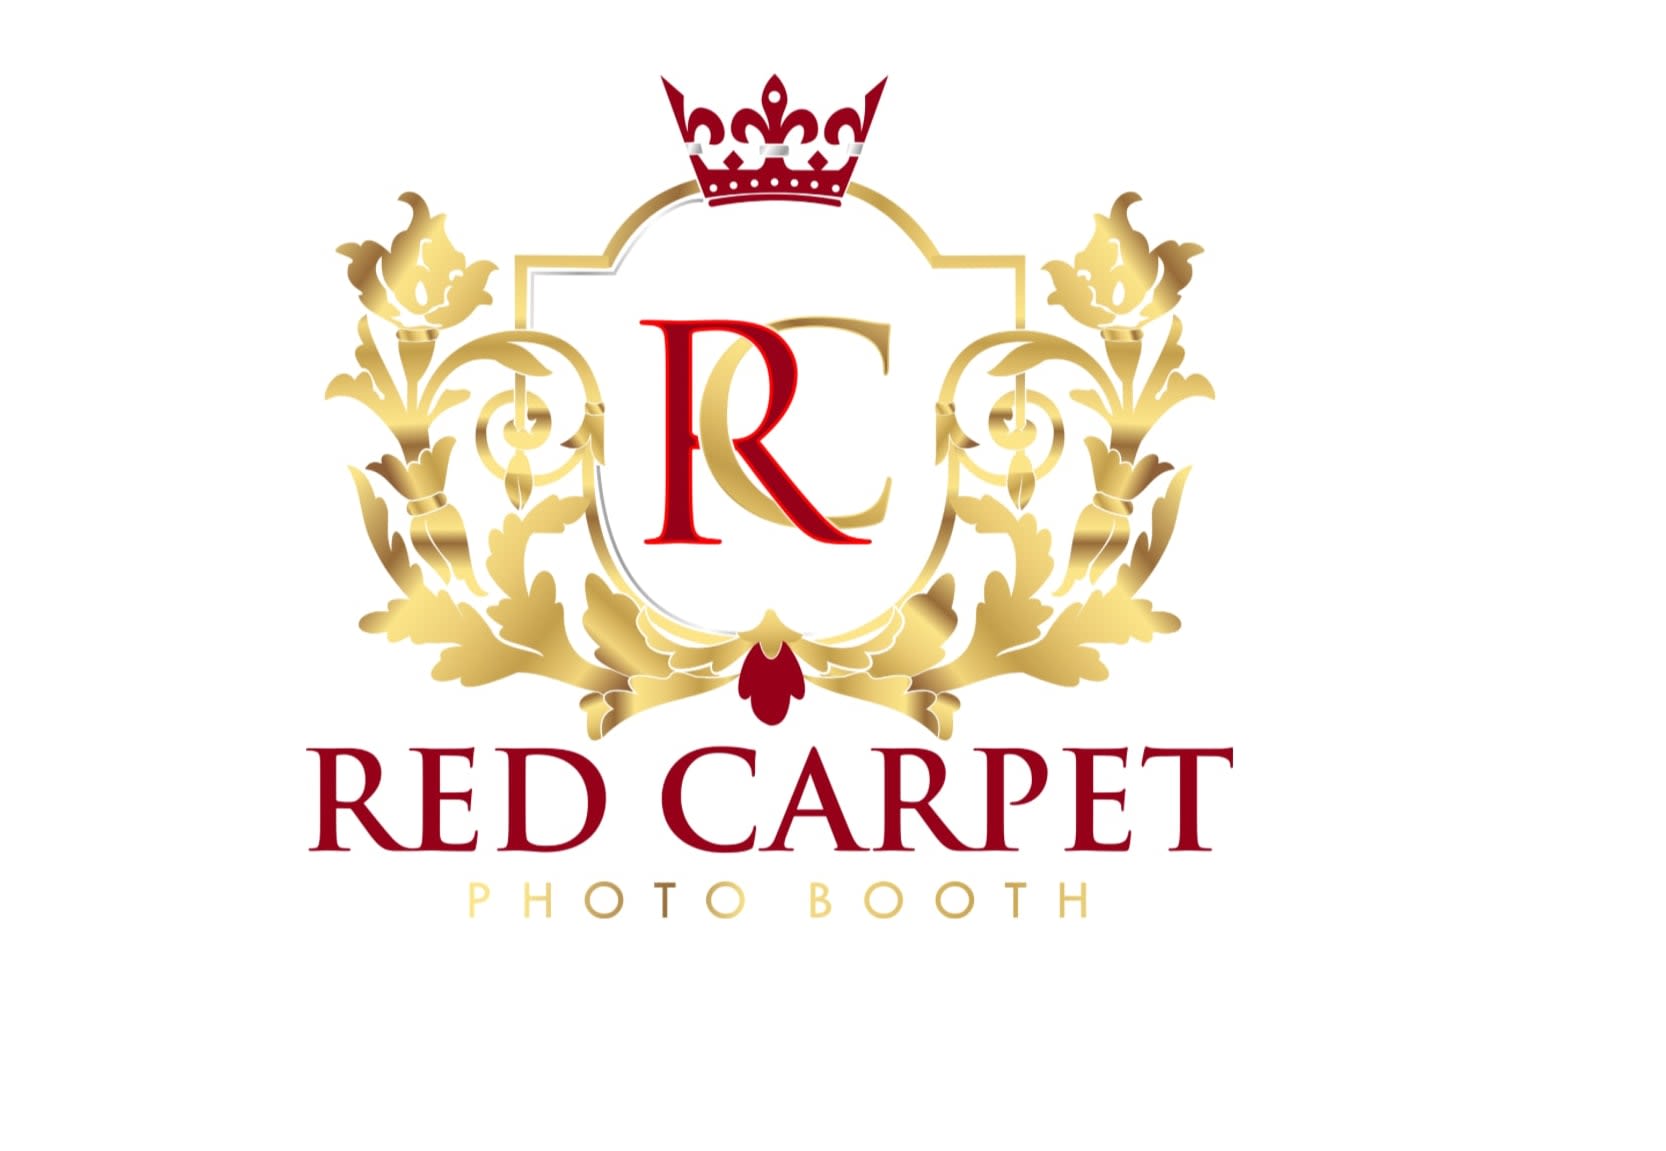 Red Carpet Photo Booth & Entertainment